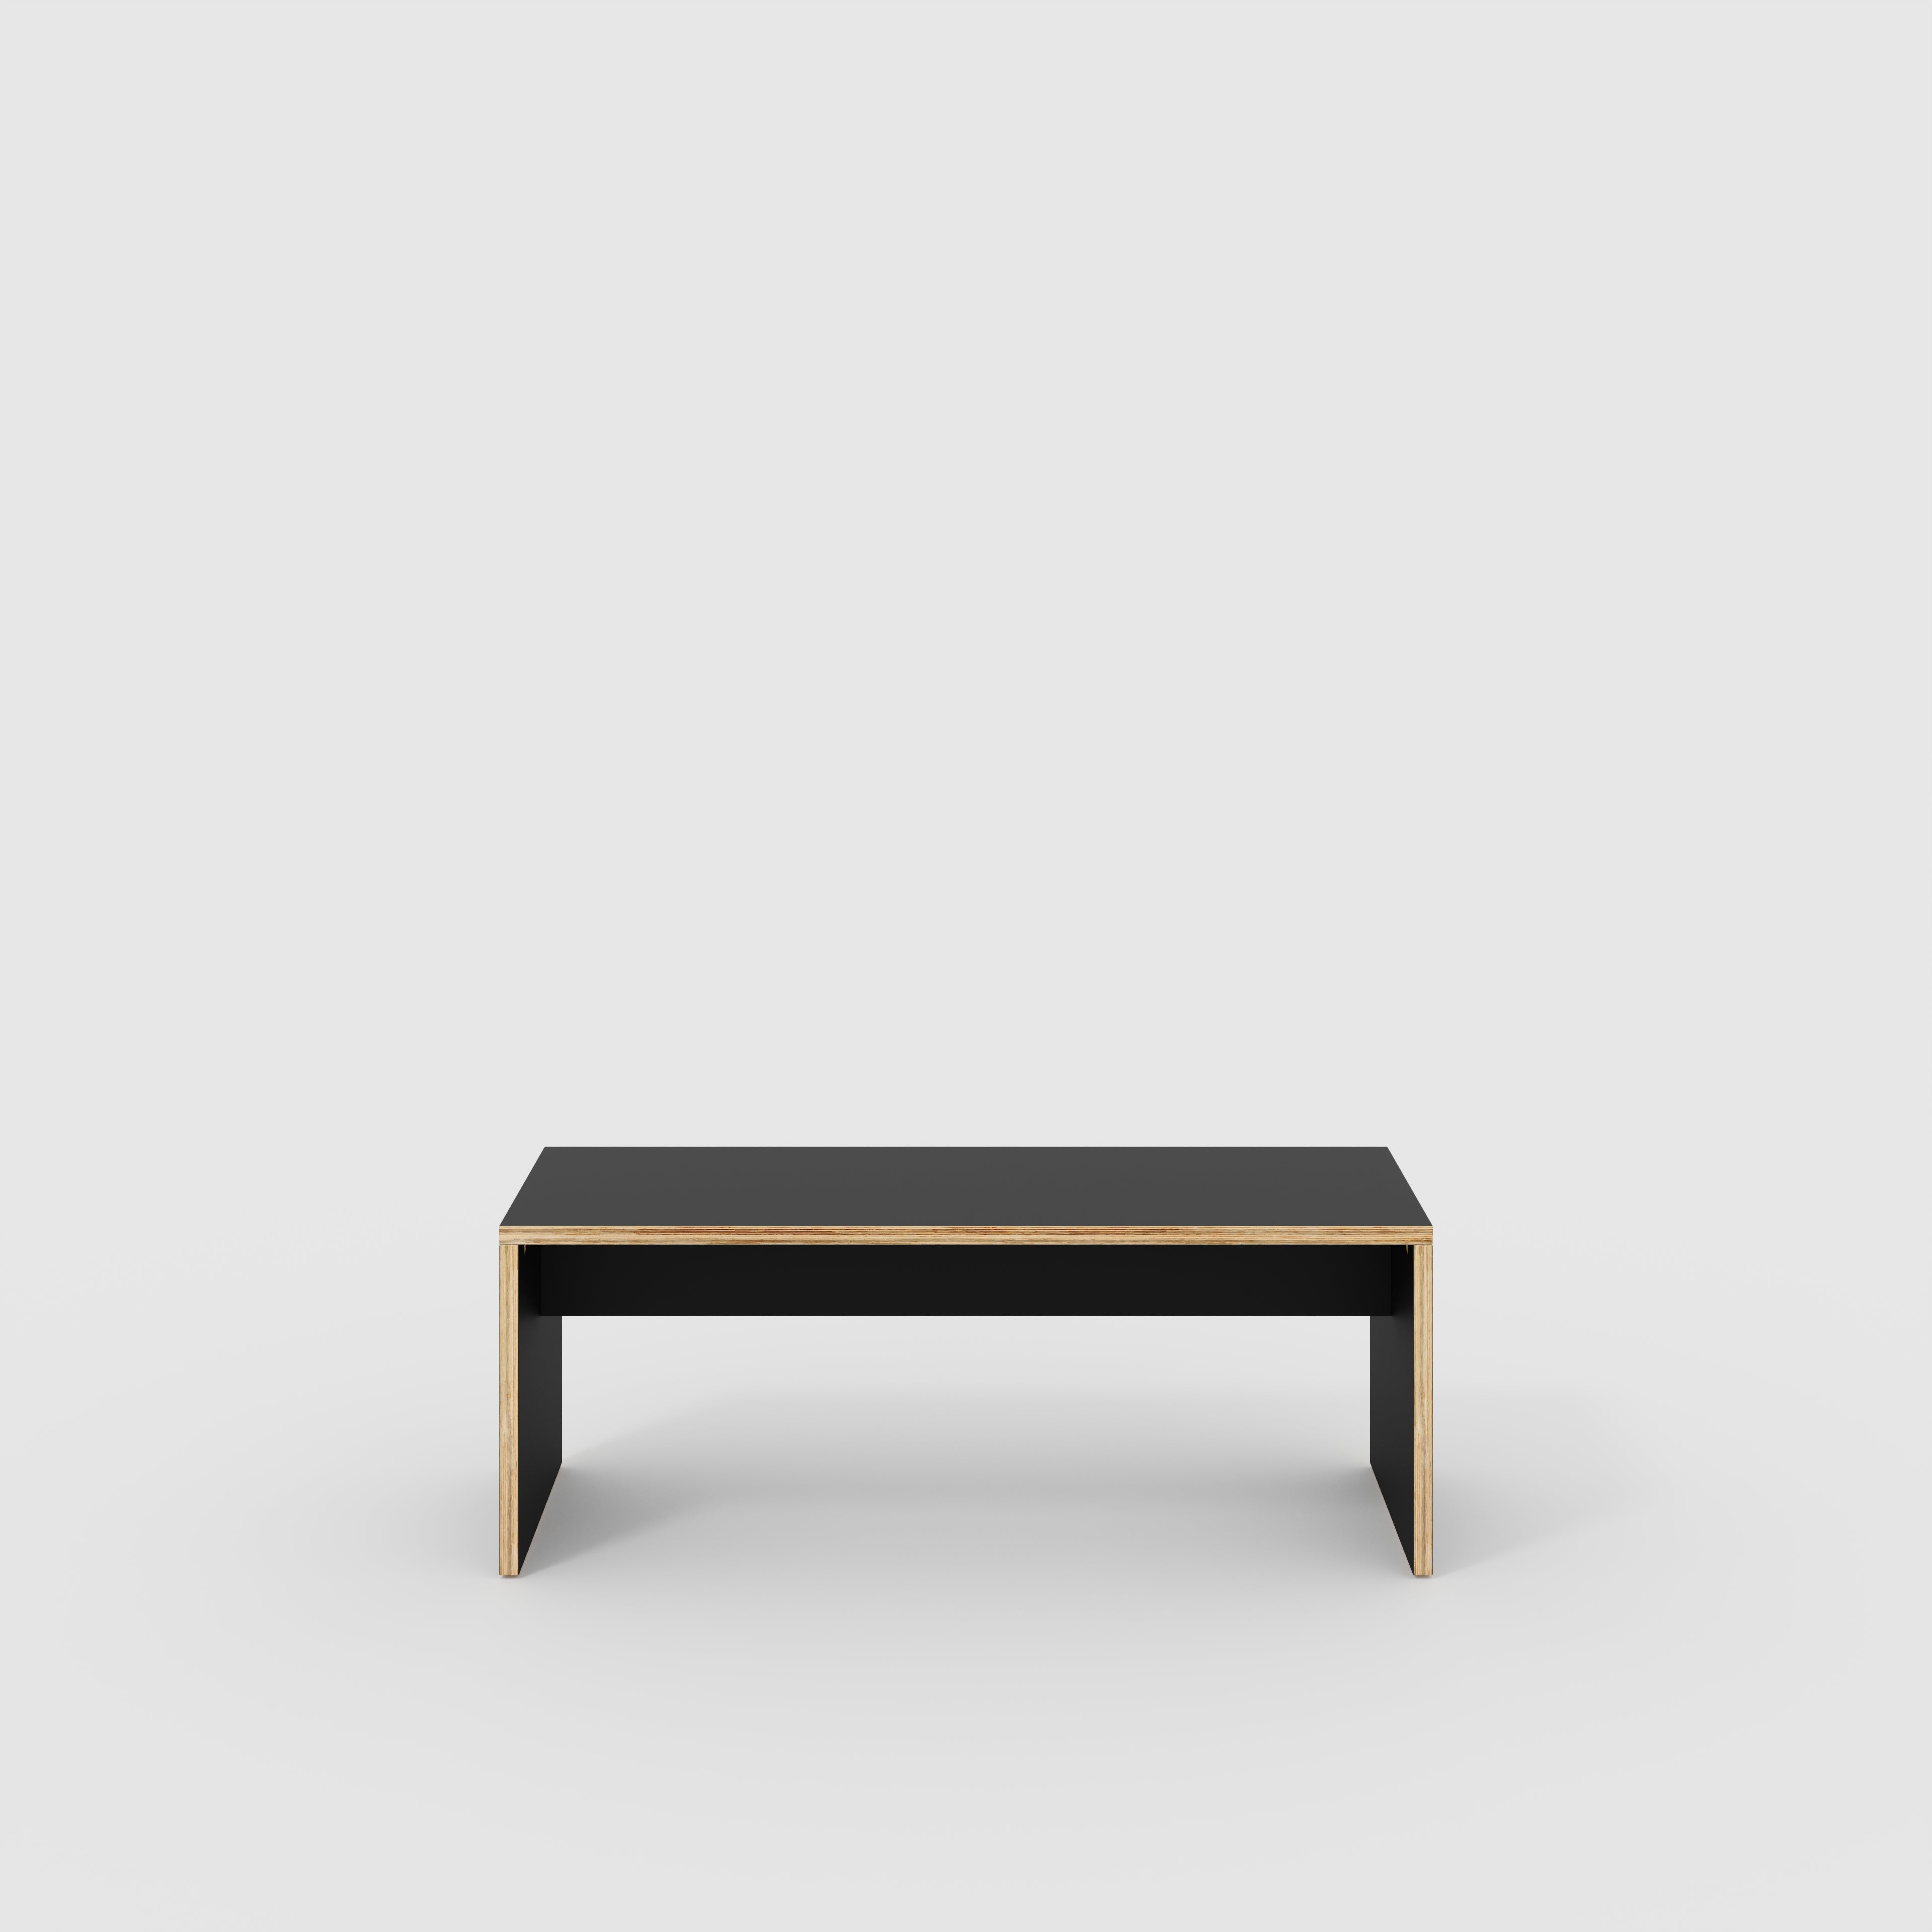 Bench Seat with Solid Sides - Formica Diamond Black - 1200(w) x 400(d)